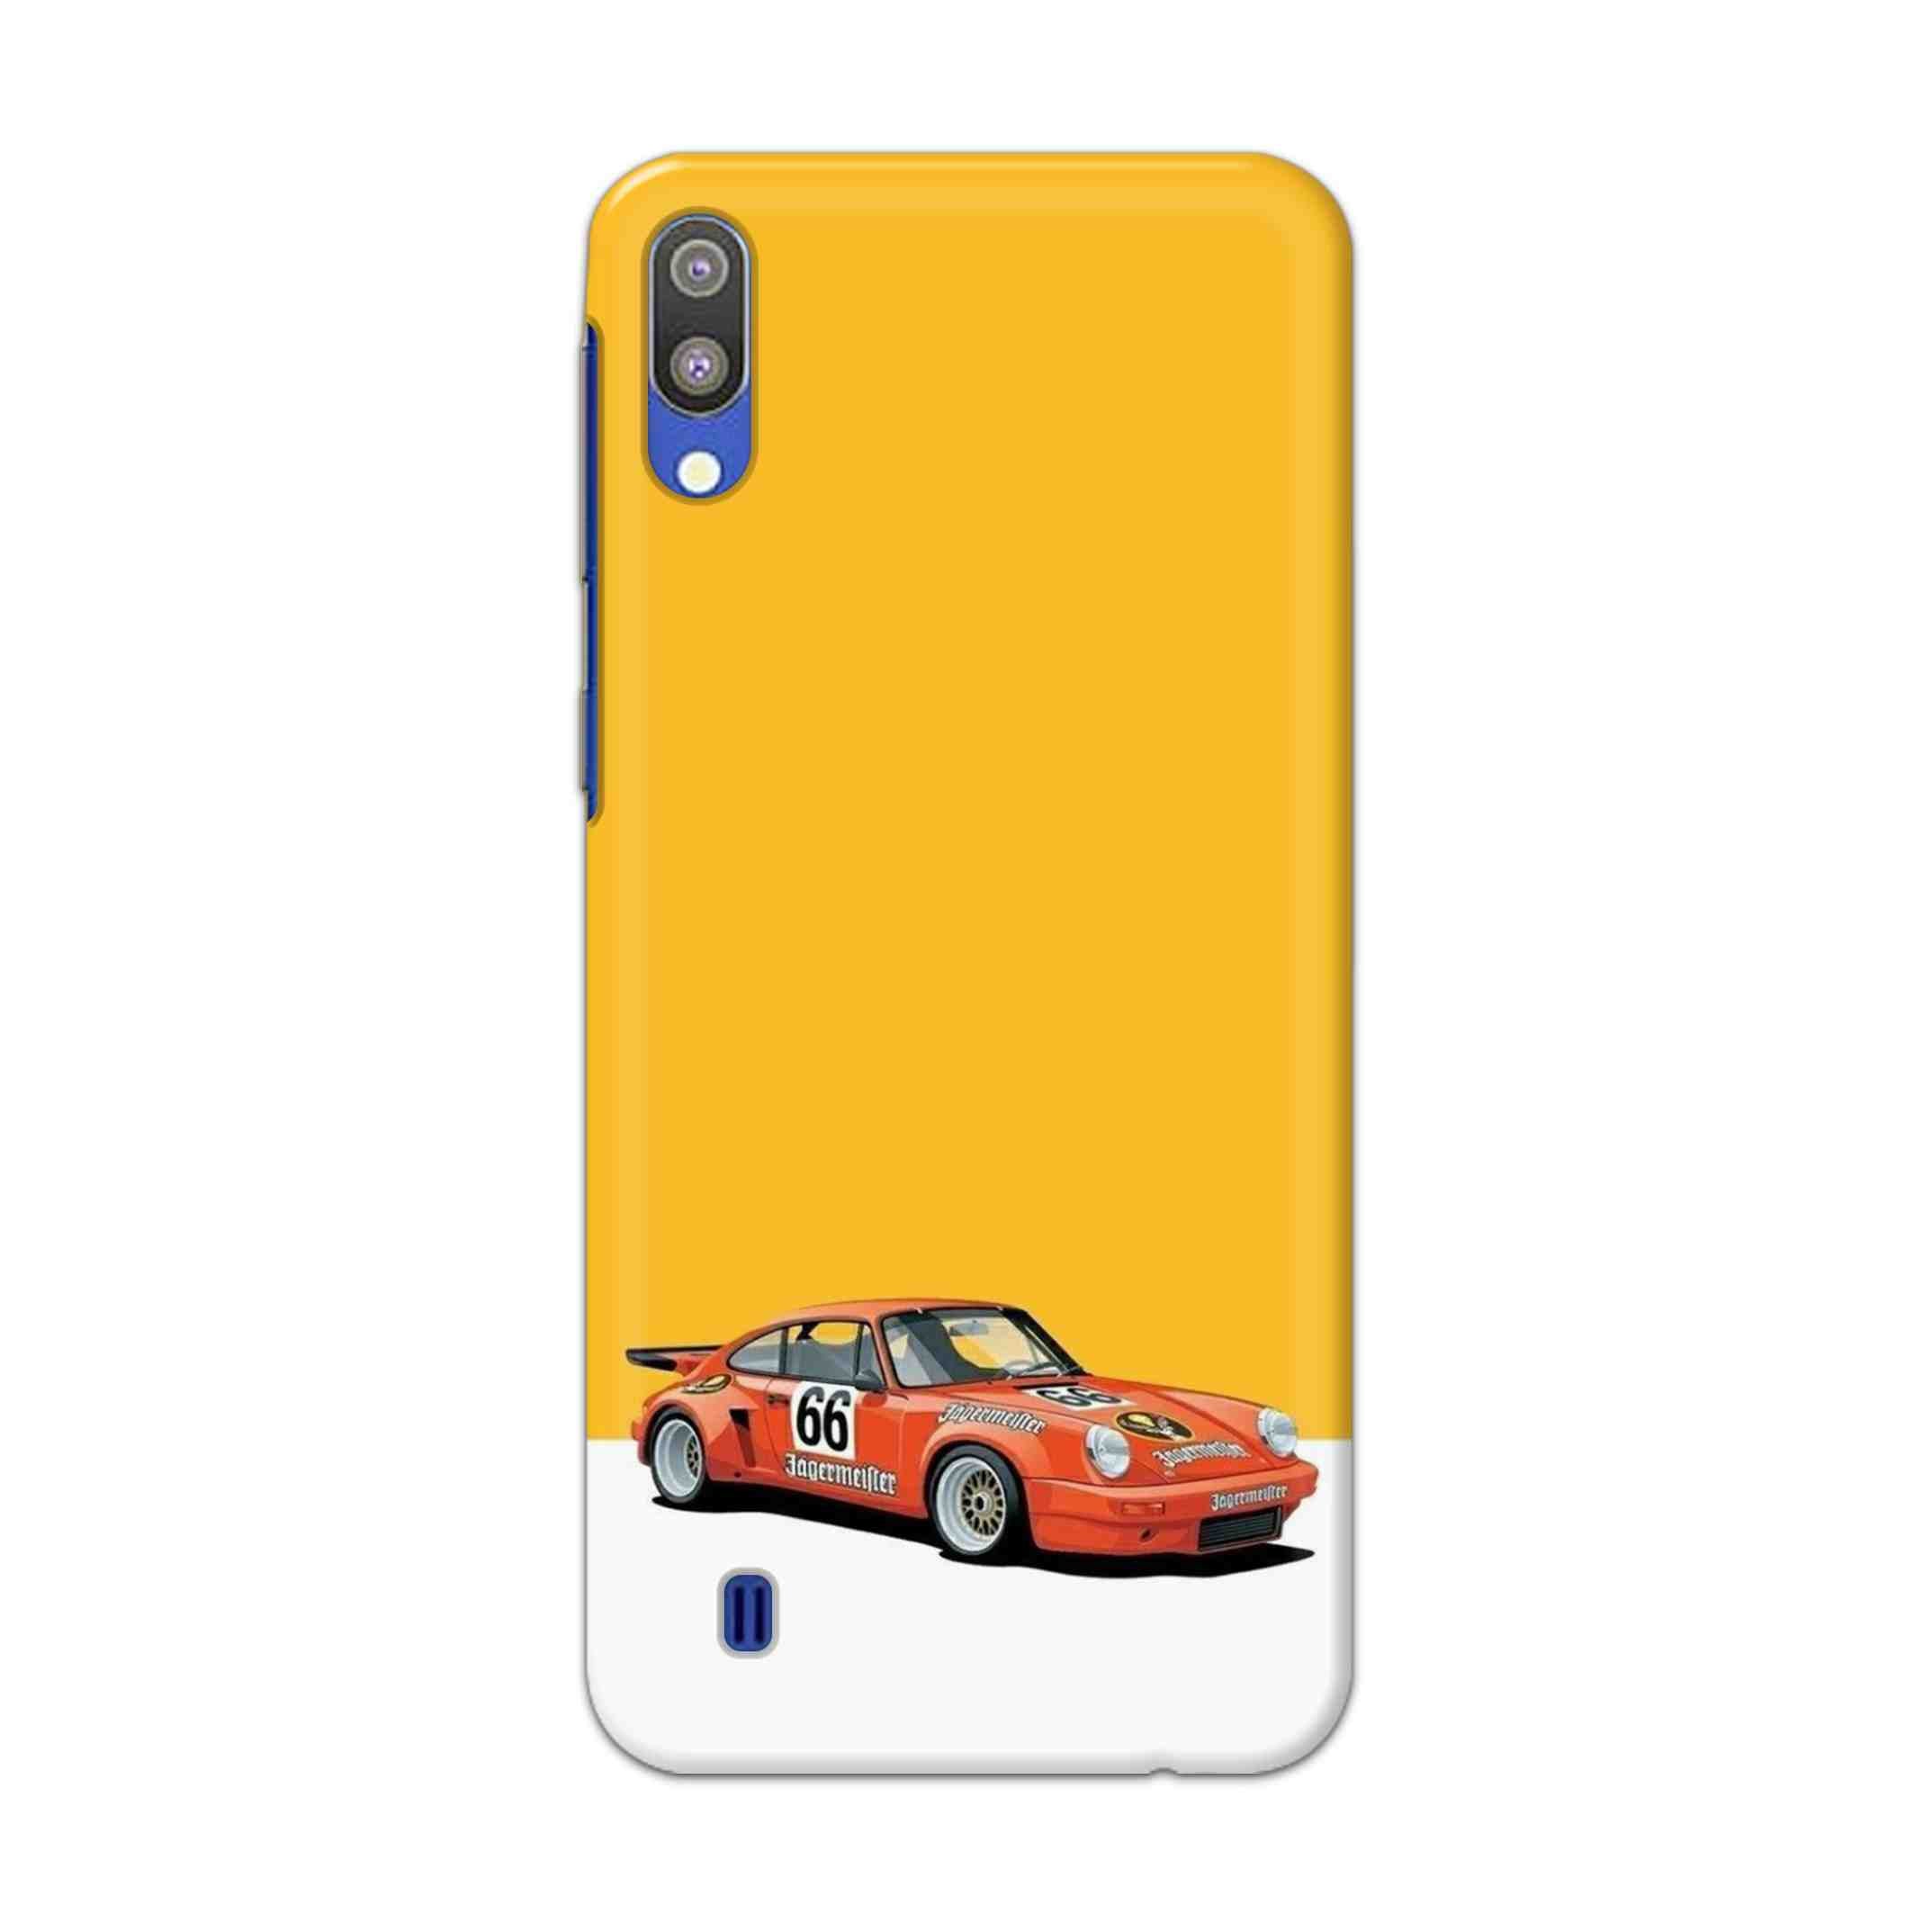 Buy Porche Hard Back Mobile Phone Case Cover For Samsung Galaxy M10 Online